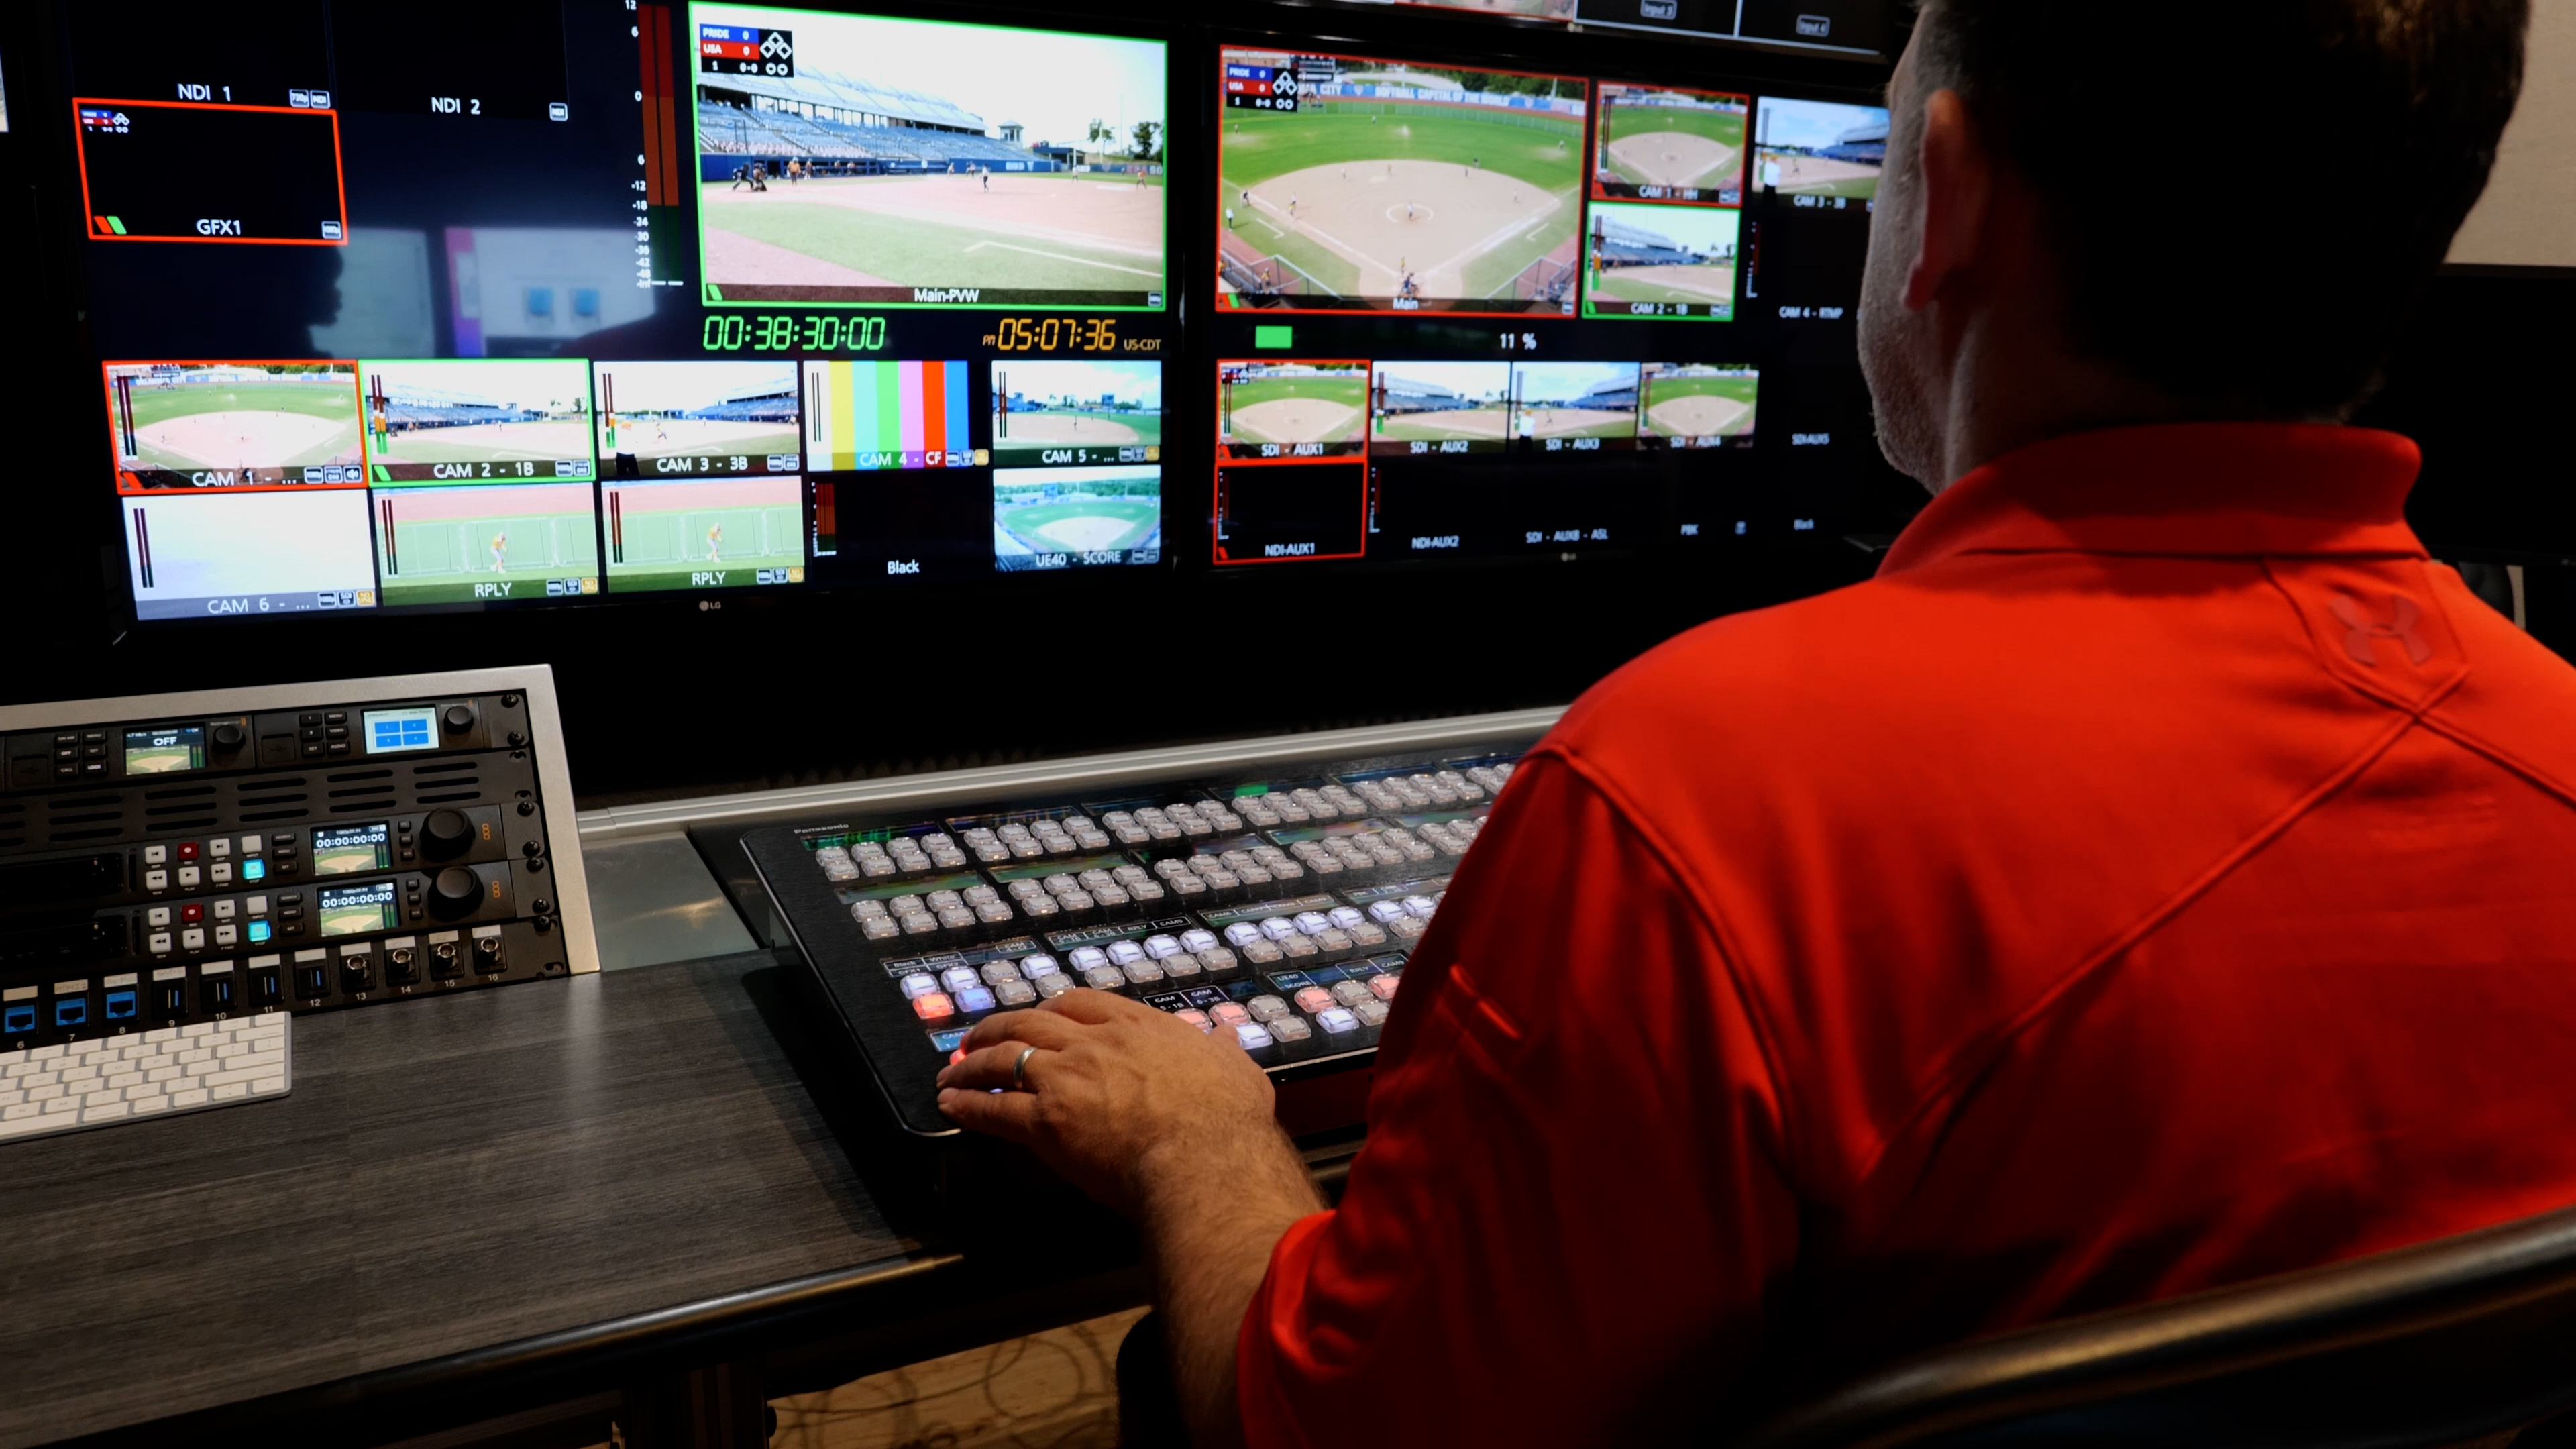 They leveraged the SRT streaming capabilities of each camera to send high-quality video feeds from the stadium in Oklahoma City back to the Panasonic KAIROS KC100 IP platform in their Dallas control room.